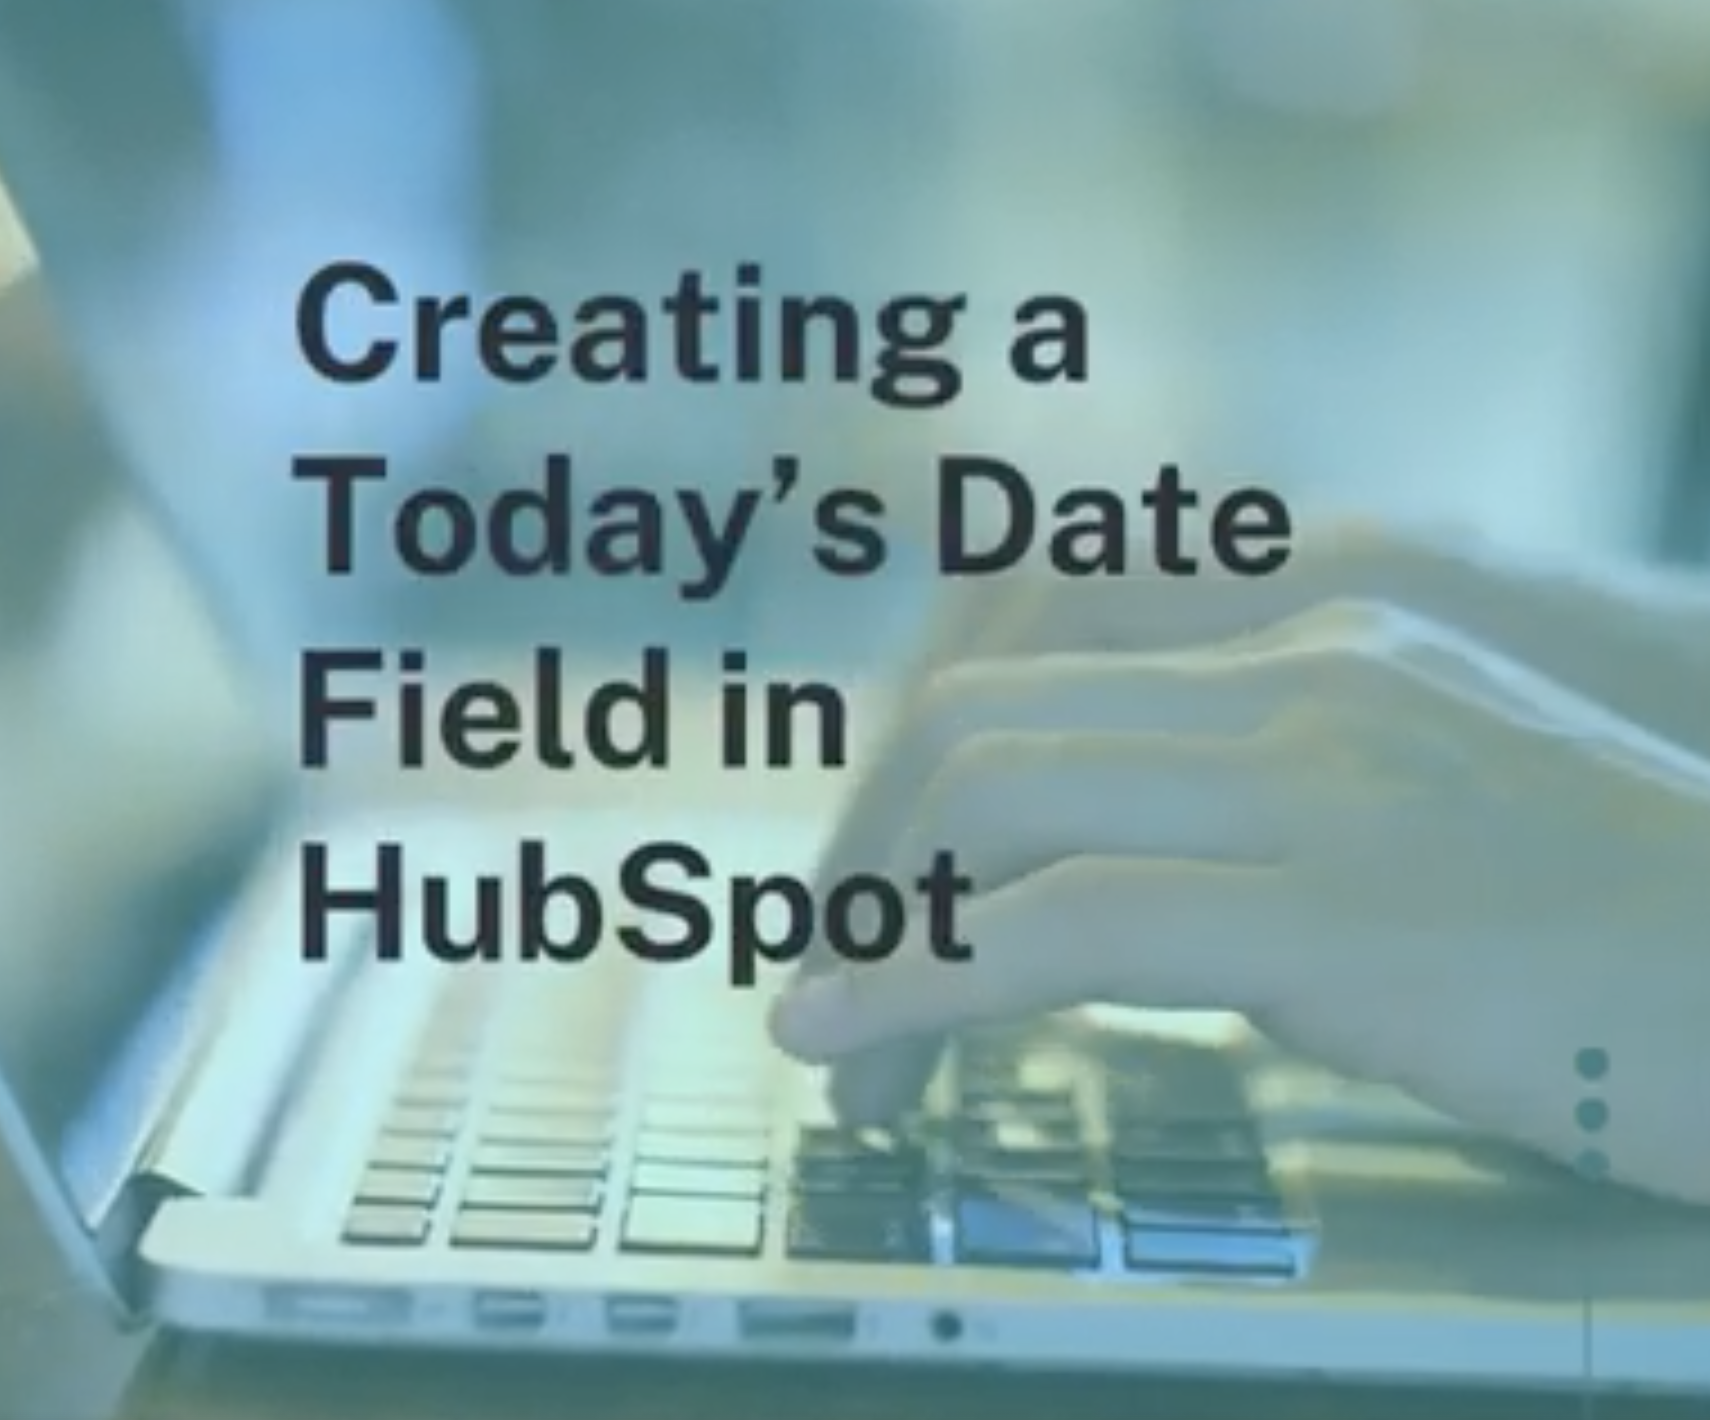 Build a Today's Date field in HubSpot